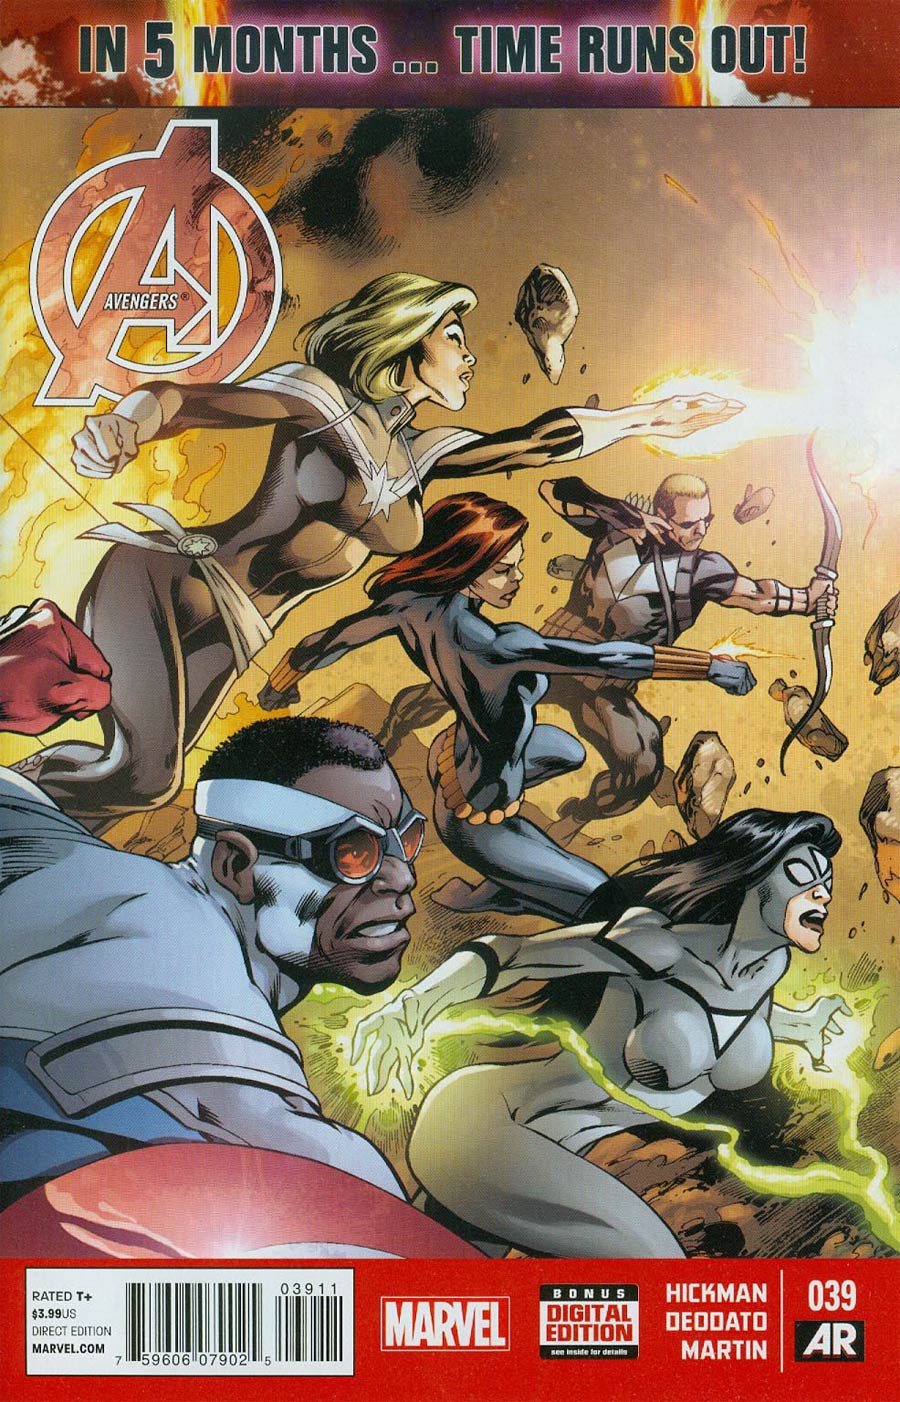 Avengers Vol 5 #39 (Time Runs Out Tie-In)